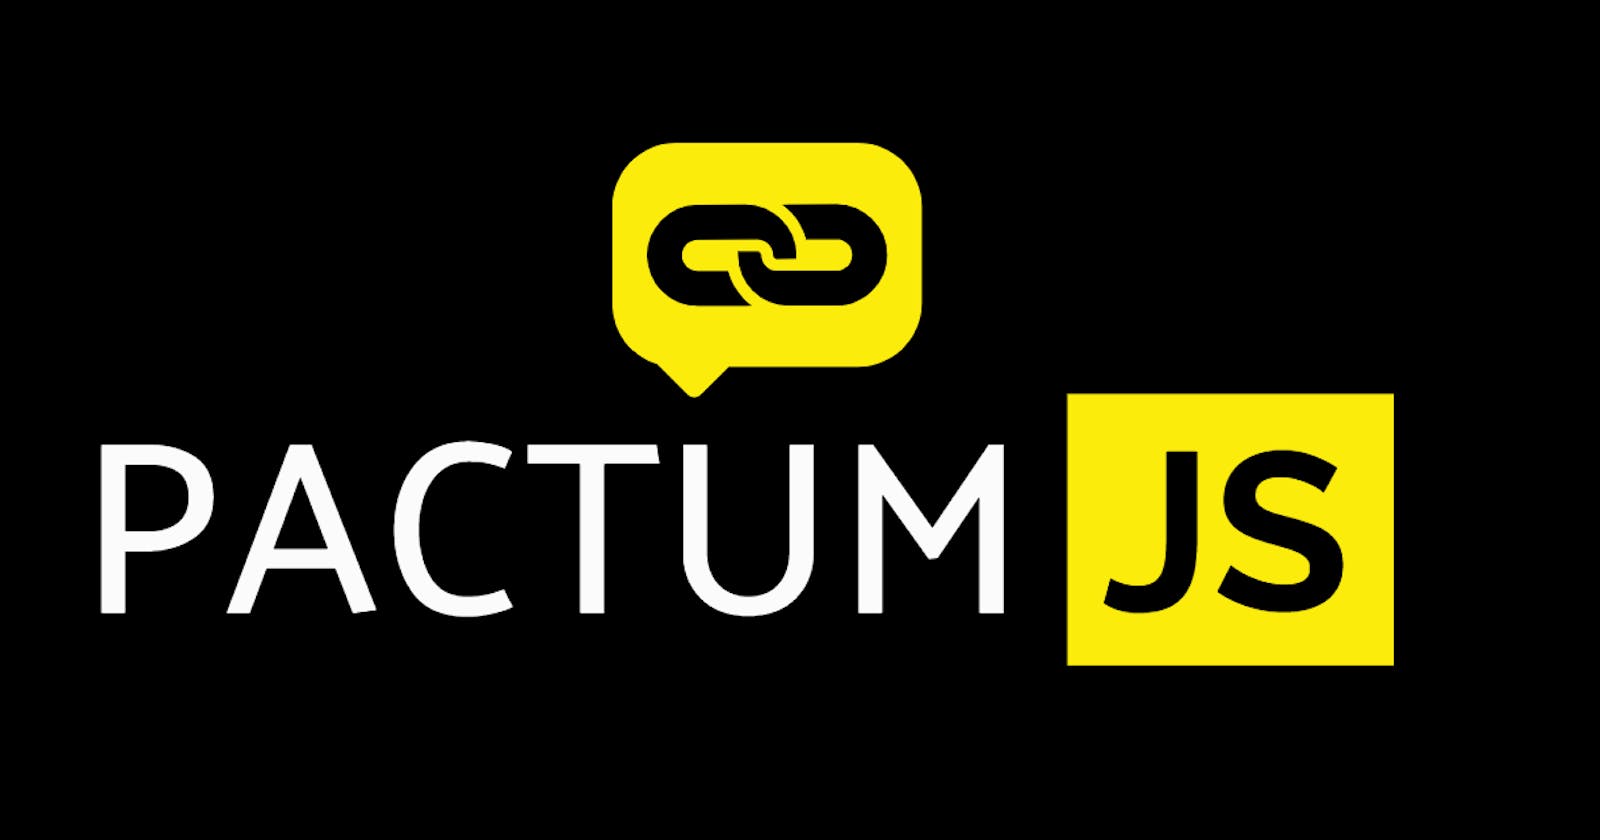 A Complete Guide to PactumJS